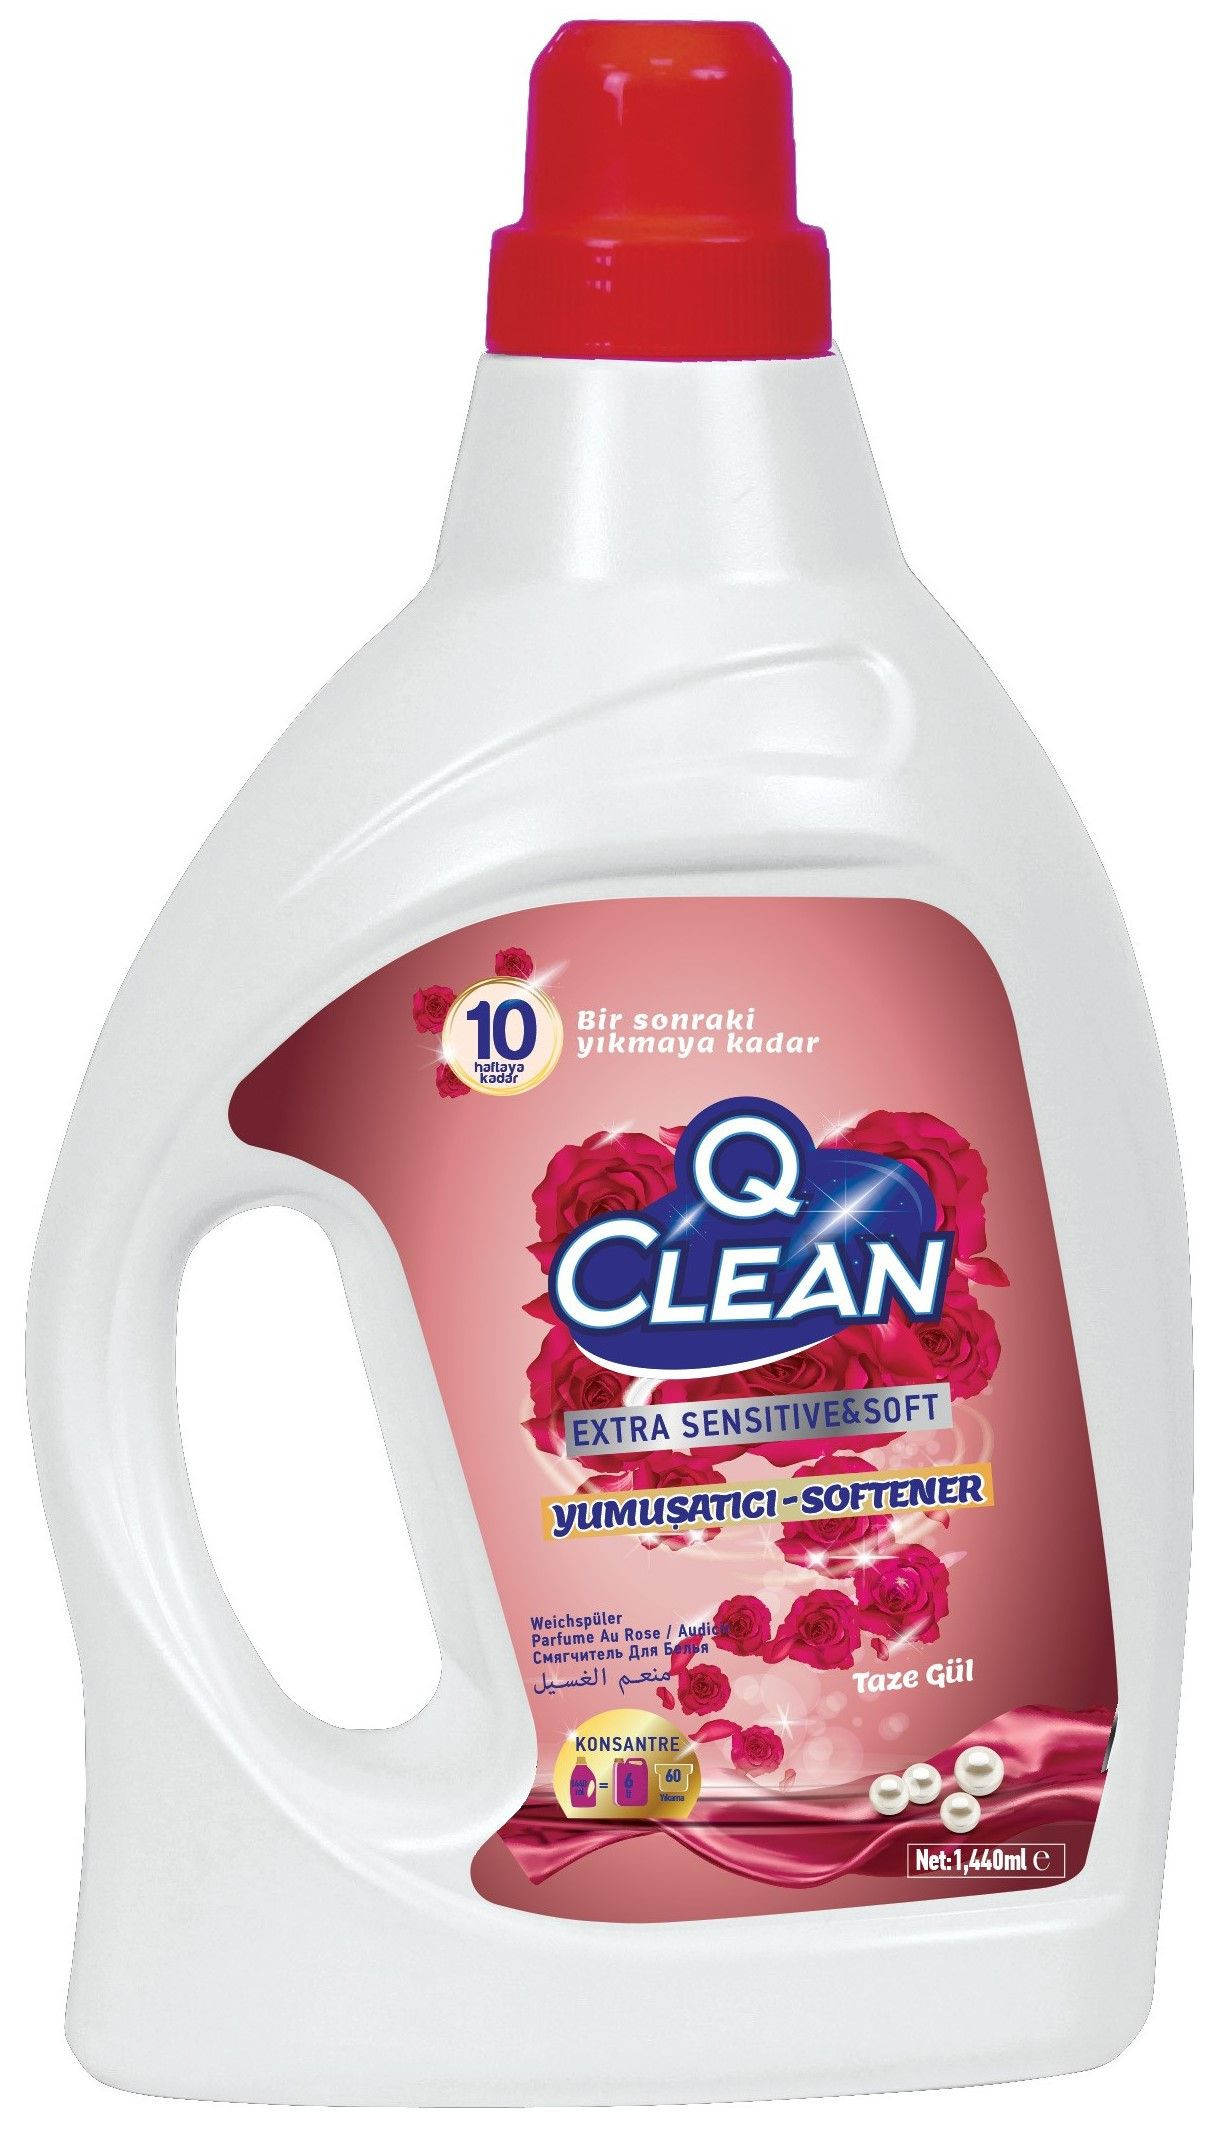 Clothes softener QClean